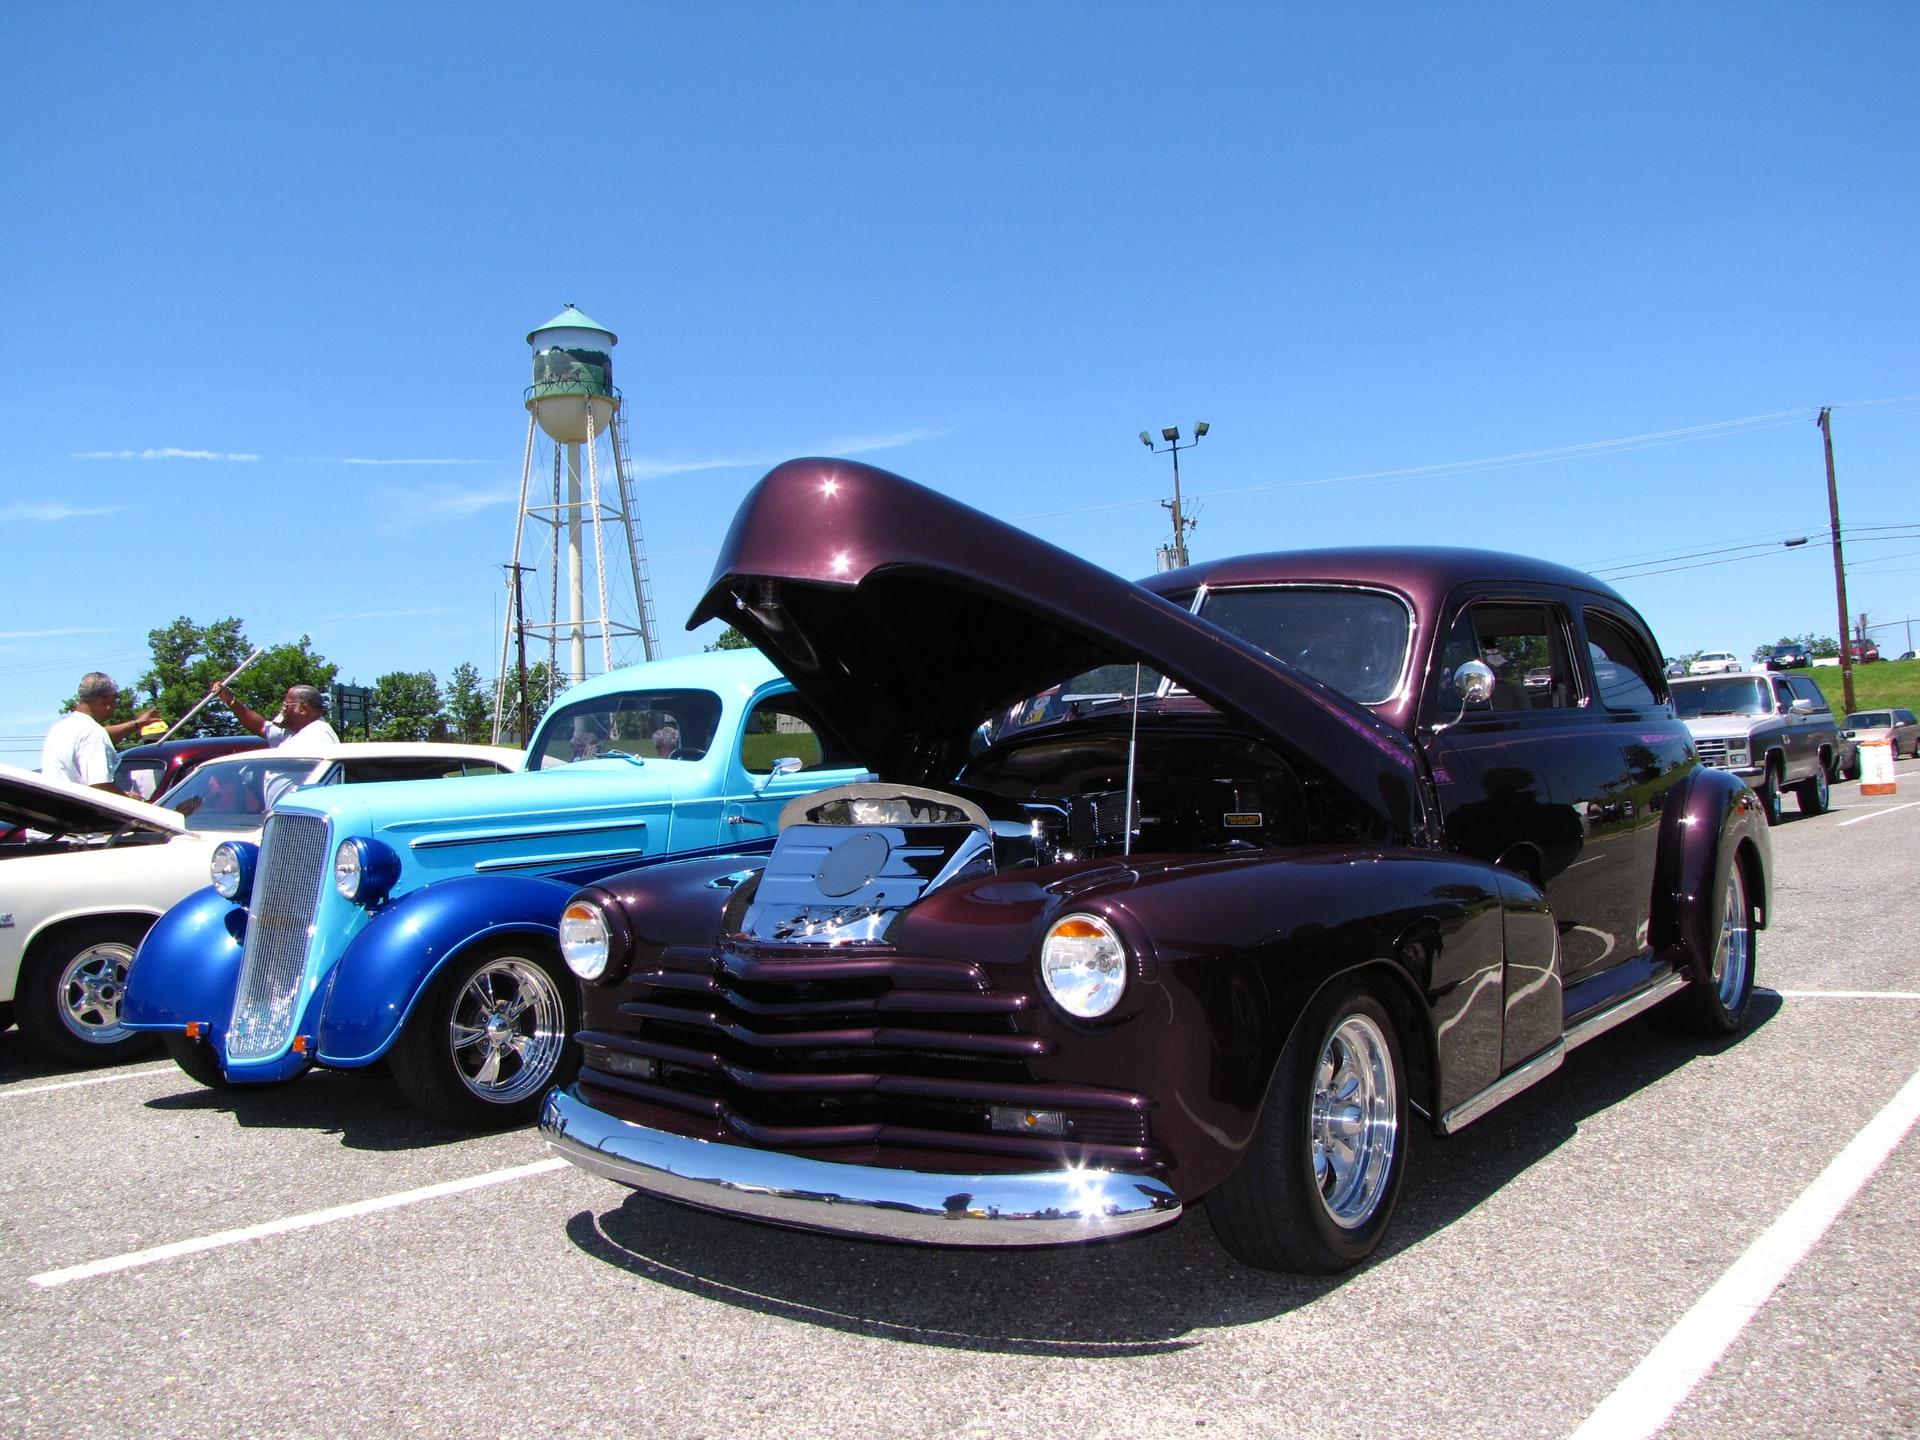 The outdoor setup of the Motor Bella auto show was a hit with attendees.